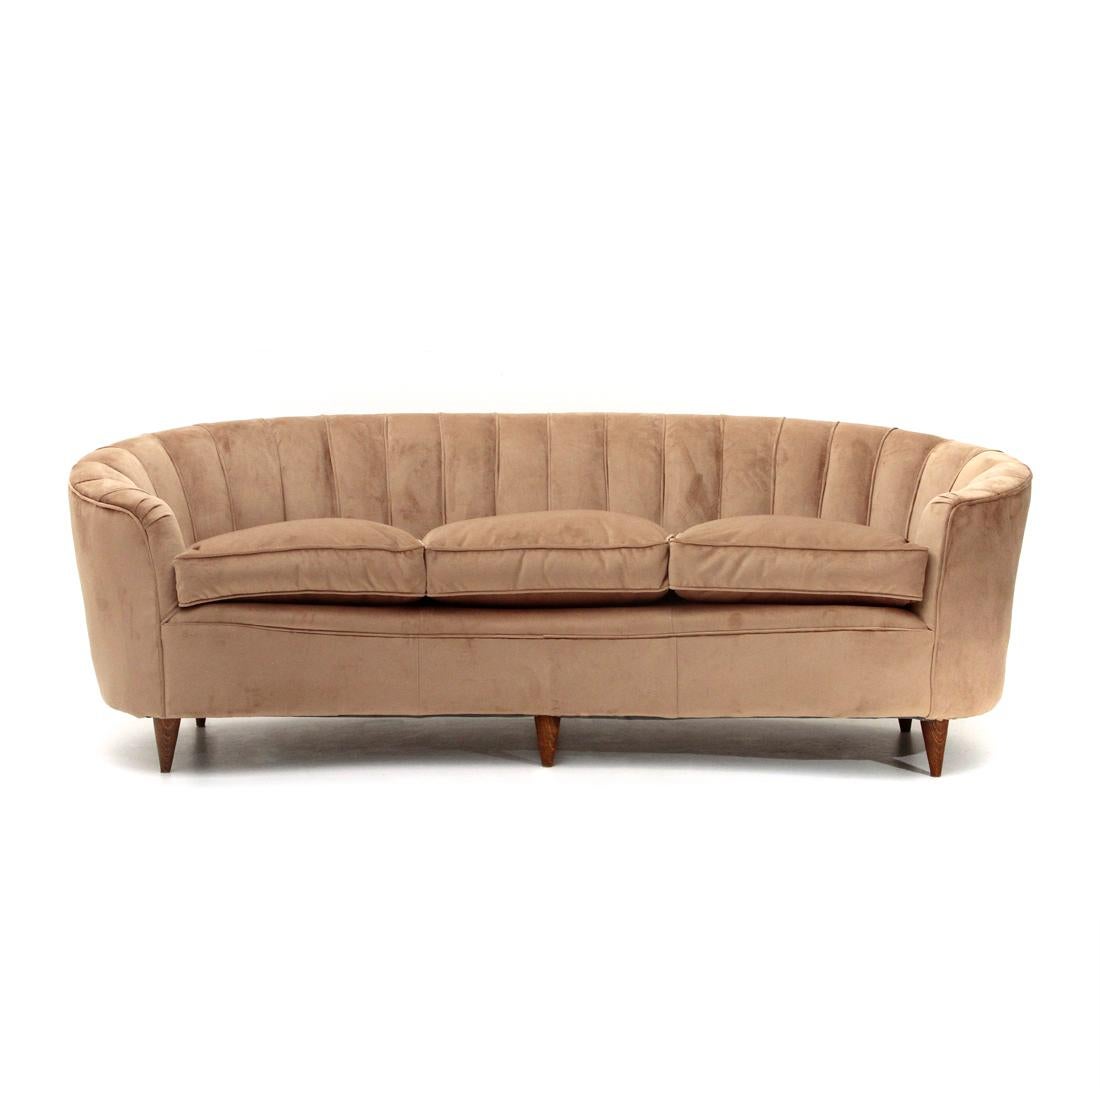 Velvet Mid-Century Modern 3-Seat Powder Pink-Colored Curved Sofa, 1950s For Sale